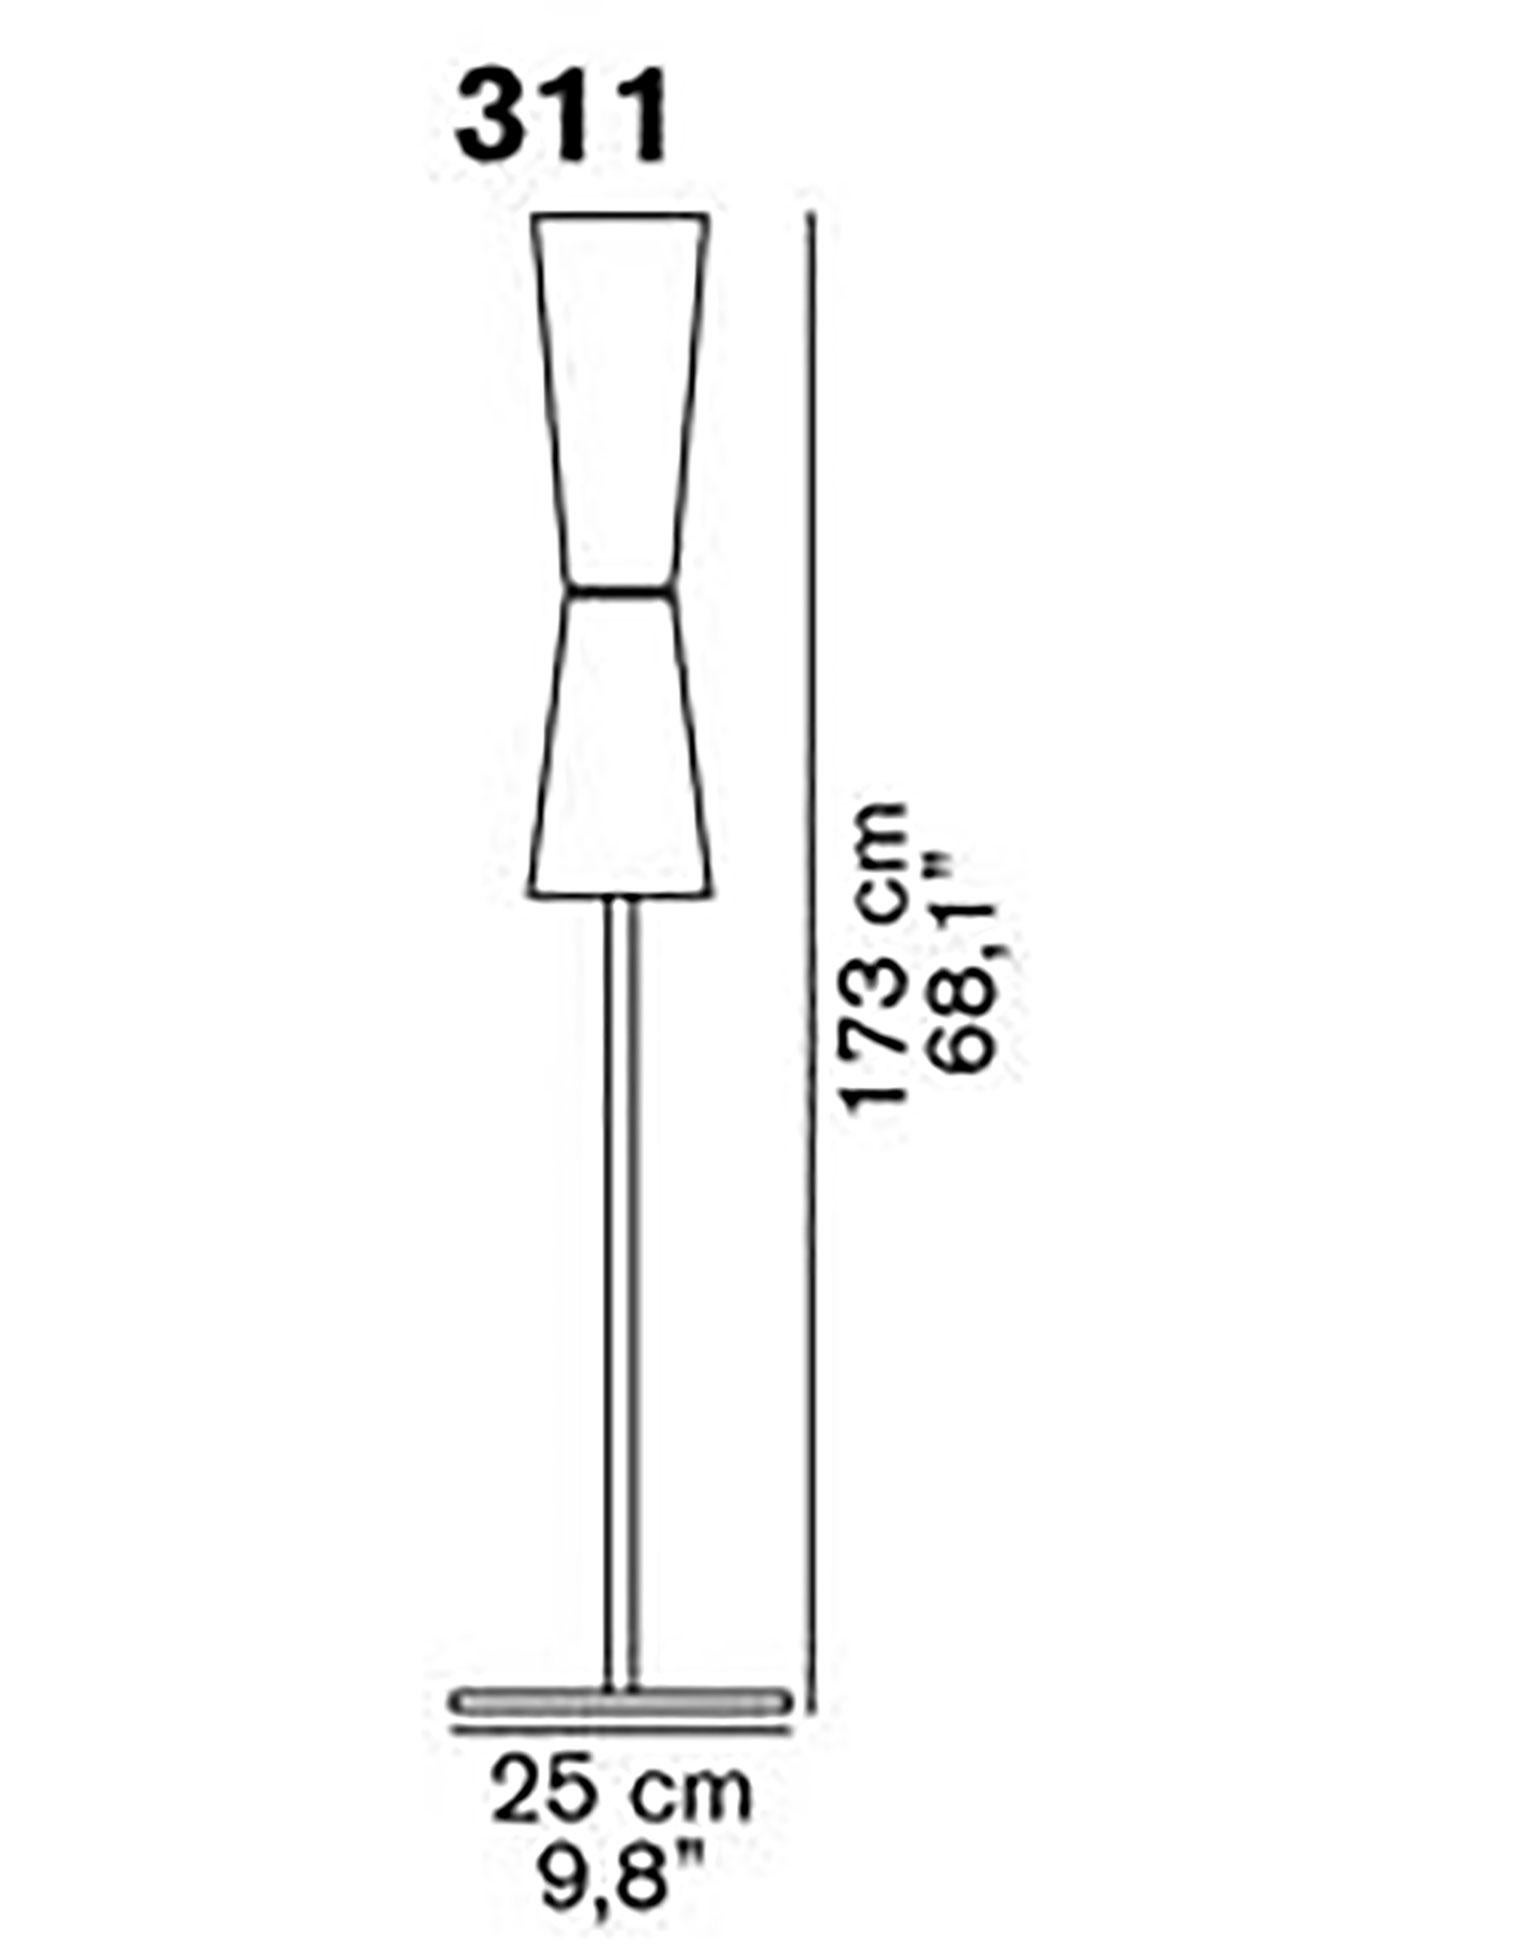 Plated Lu-Lu Floor Lamp by Stefano Casciani for Oluce For Sale